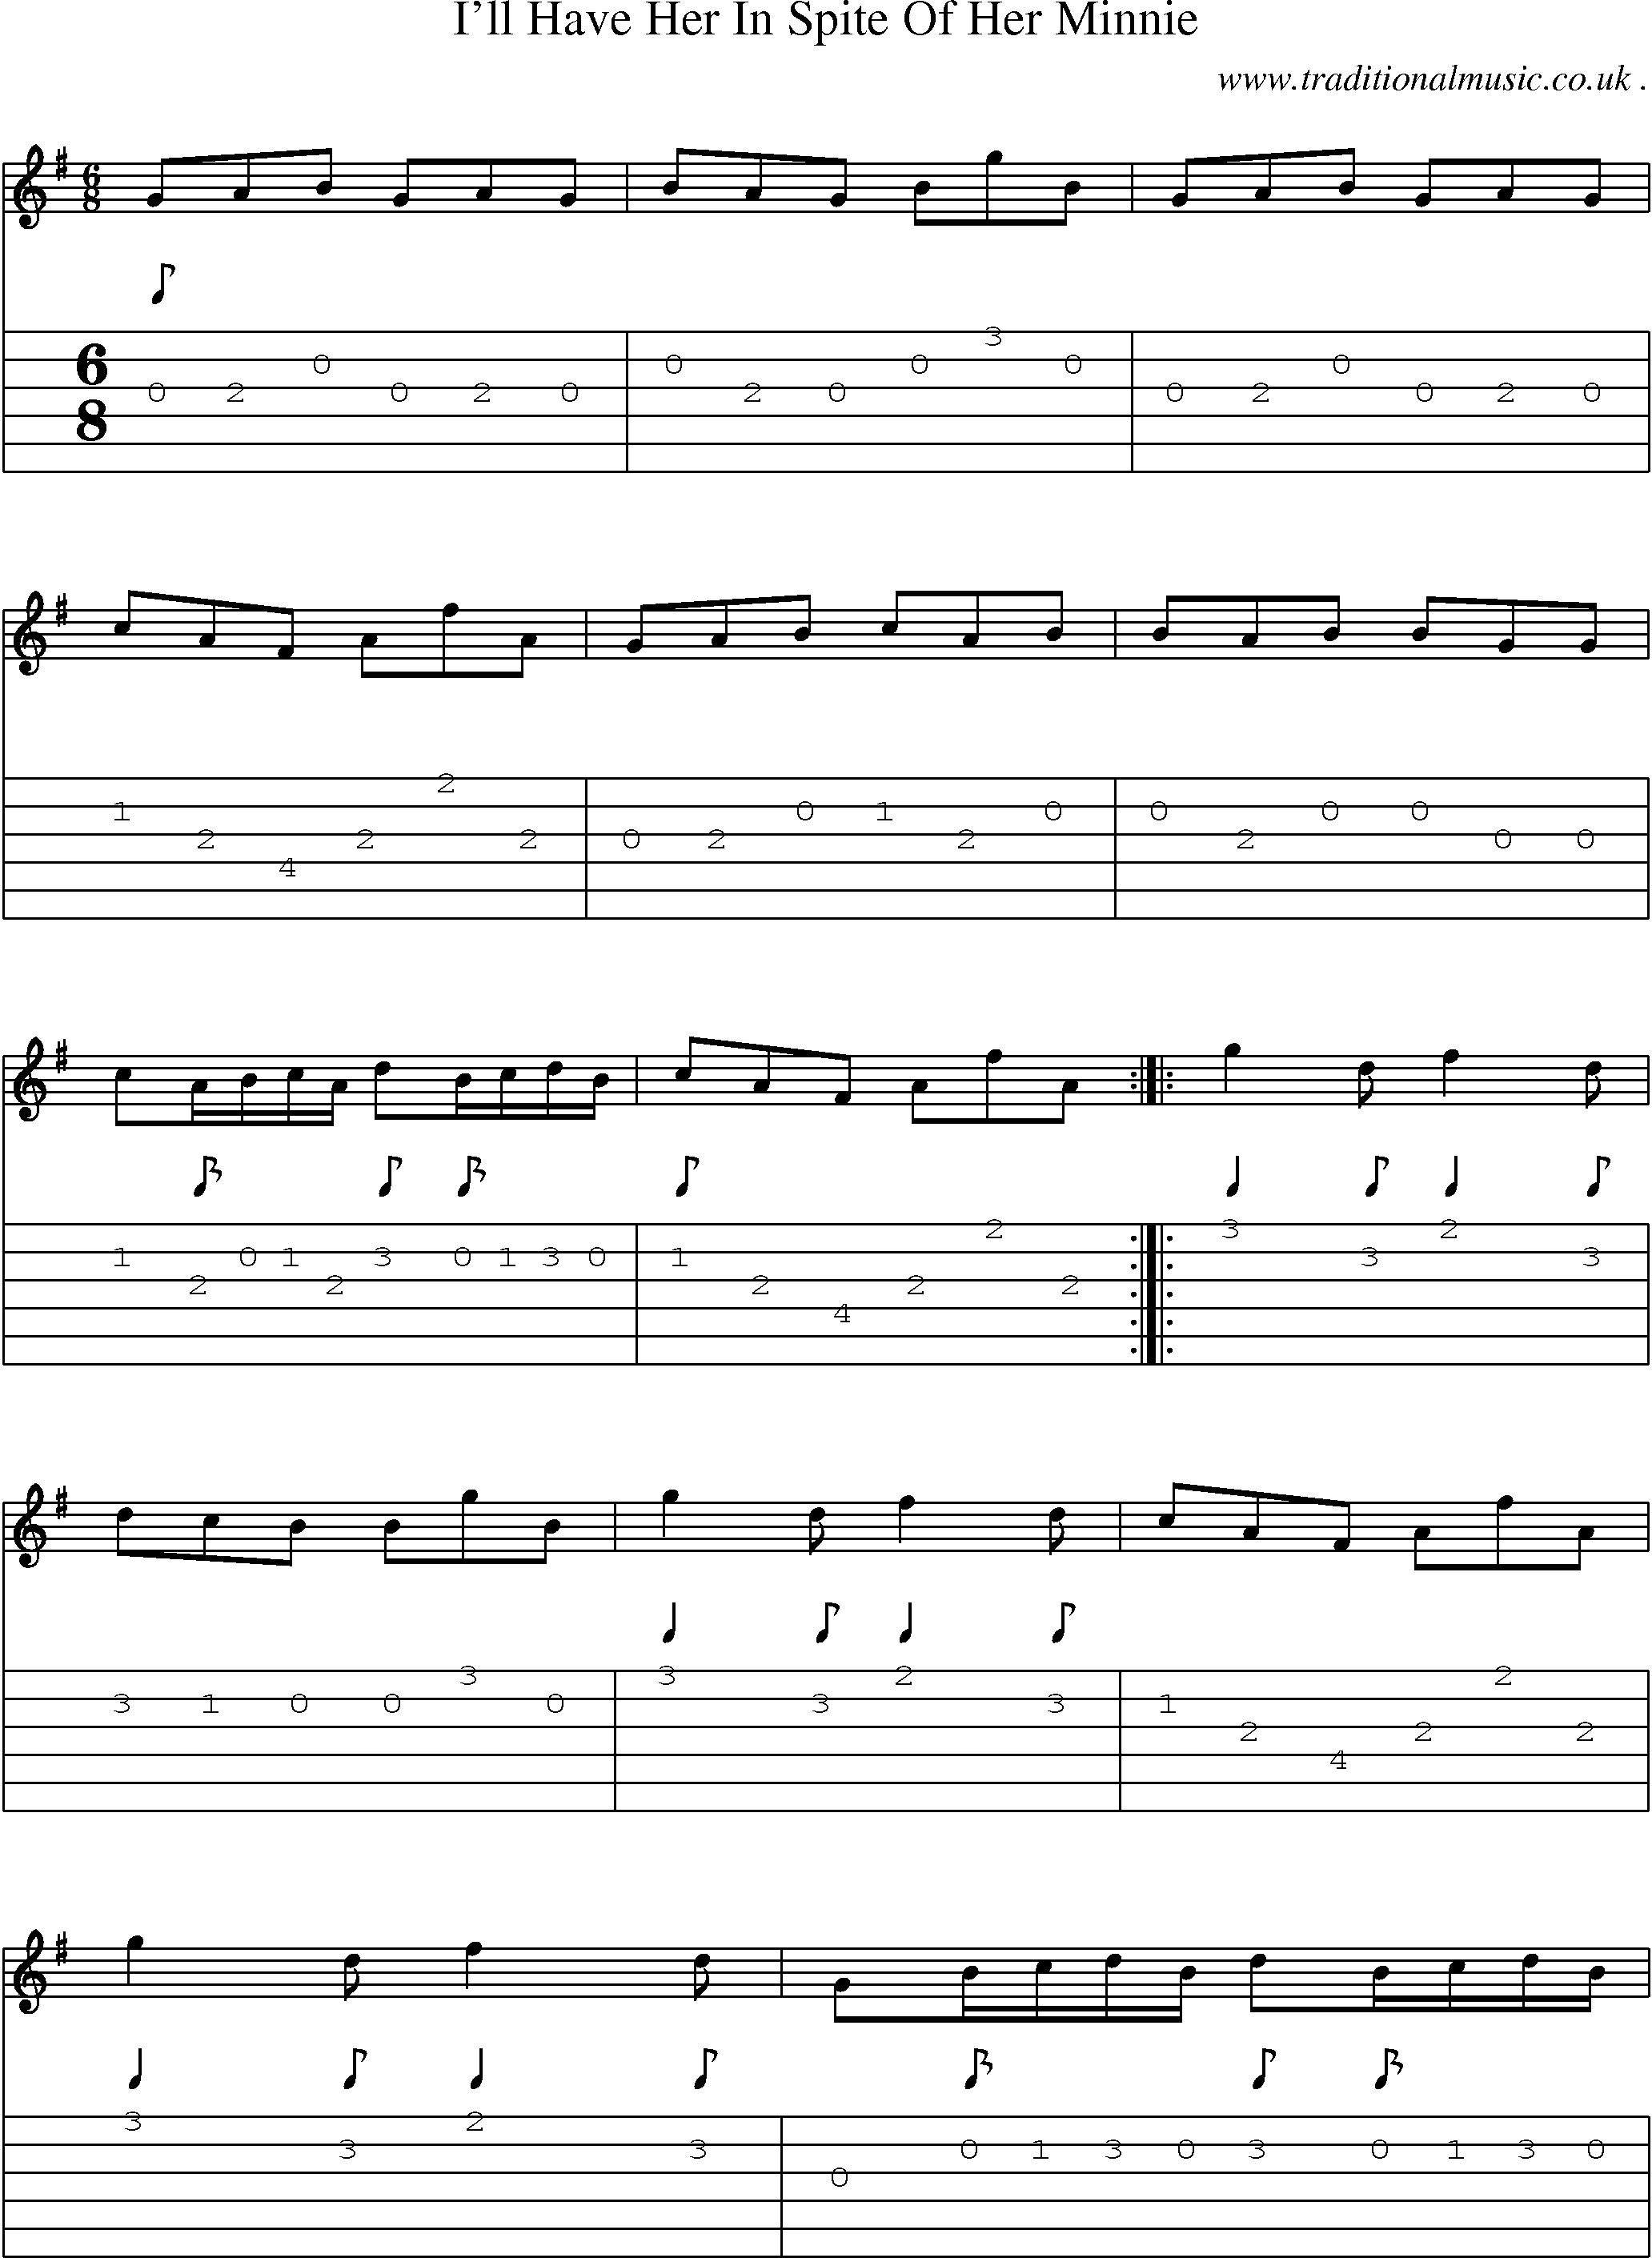 Sheet-Music and Guitar Tabs for Ill Have Her In Spite Of Her Minnie